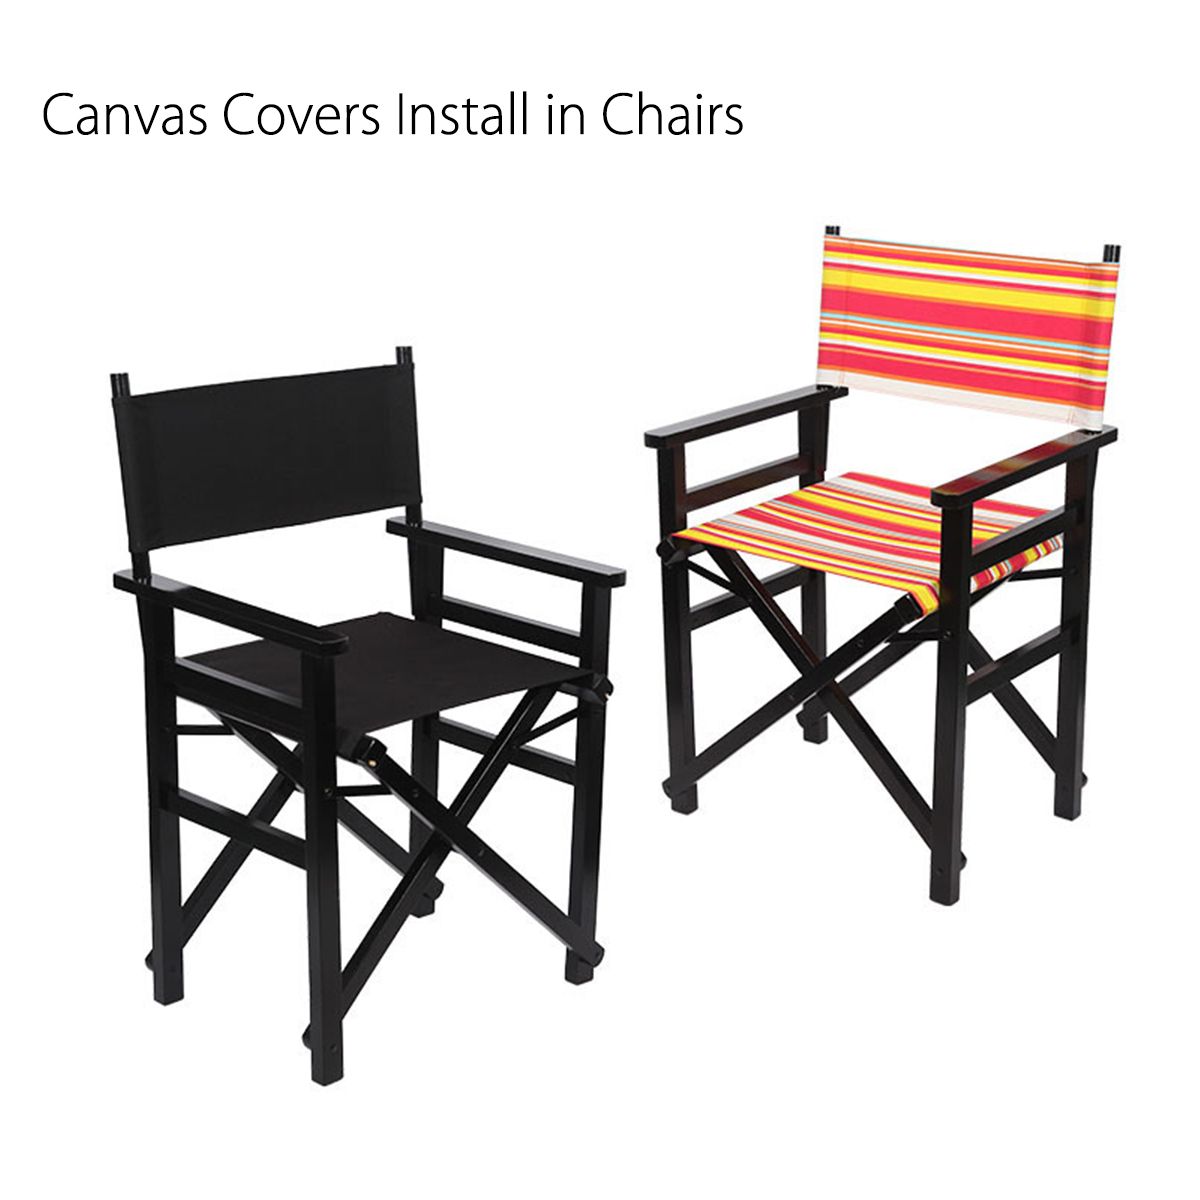 4-Colors-Casual-Directors-Chair-Canvas-Seat-Back-Cover-Replacement-Kit-1352448